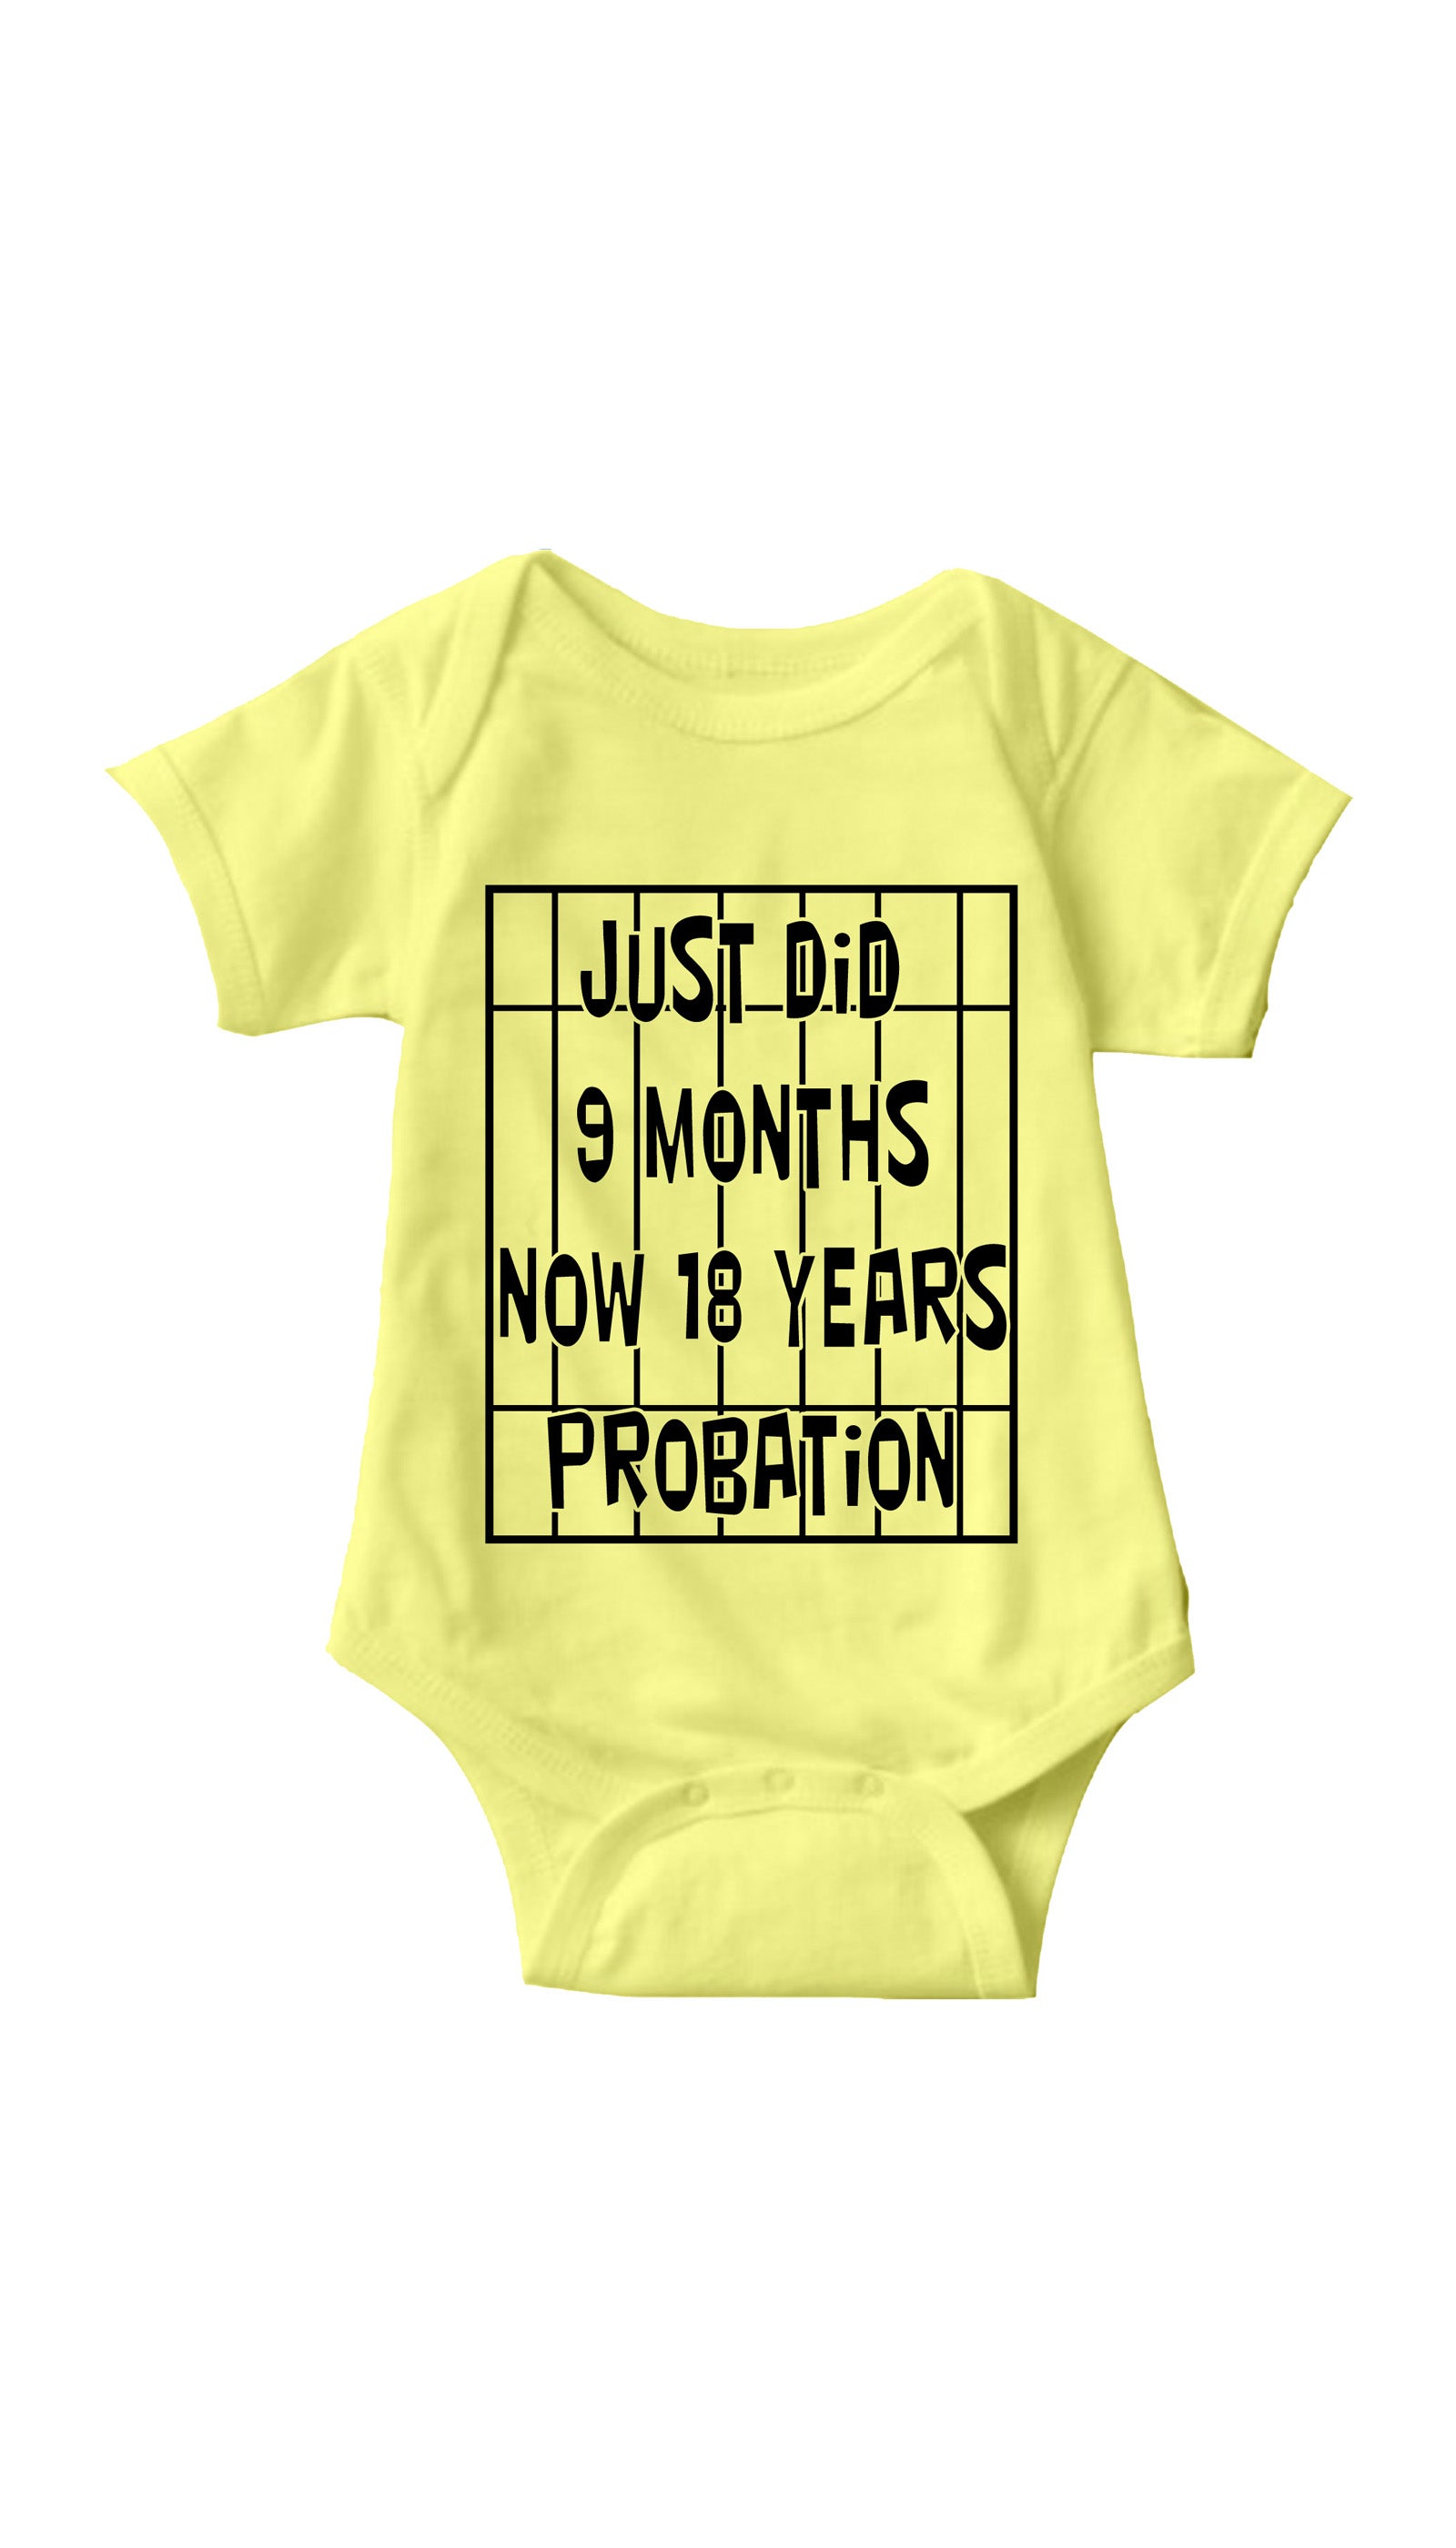 Just Did 9 Months Now 18 Years Probation Yellow Infant Onesie | Sarcastic ME